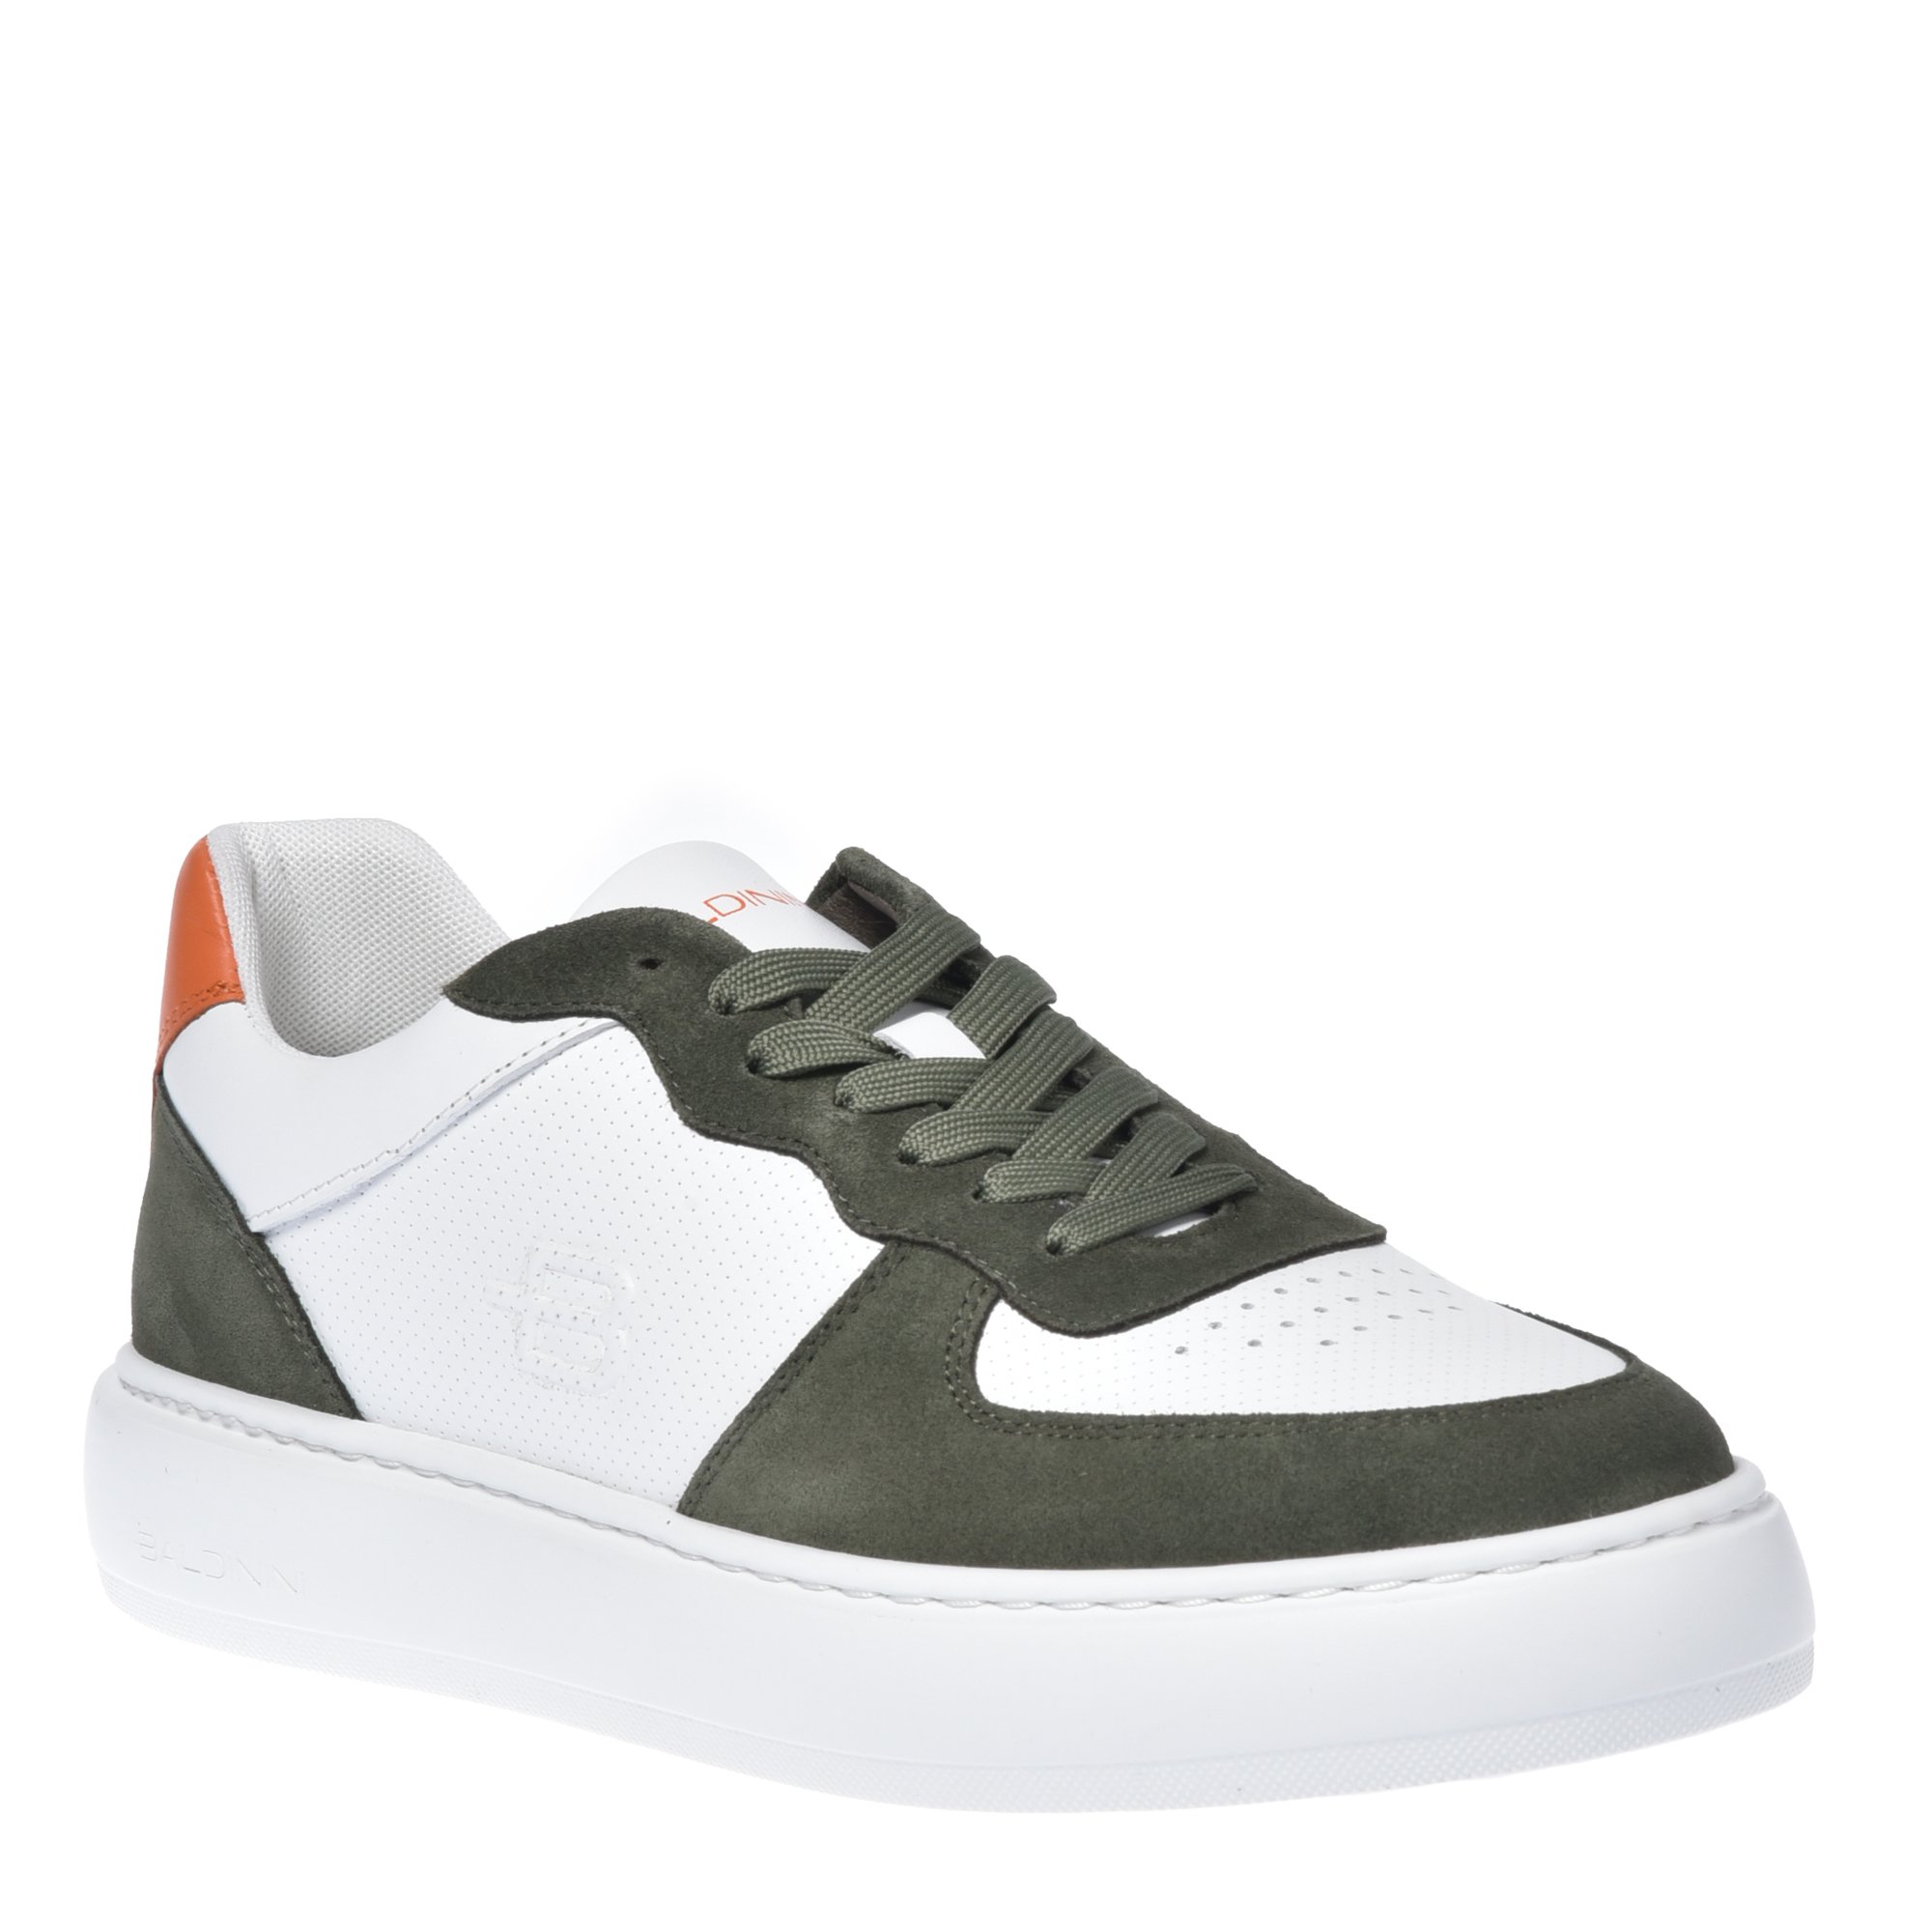 Sneaker in olive green and white suede image